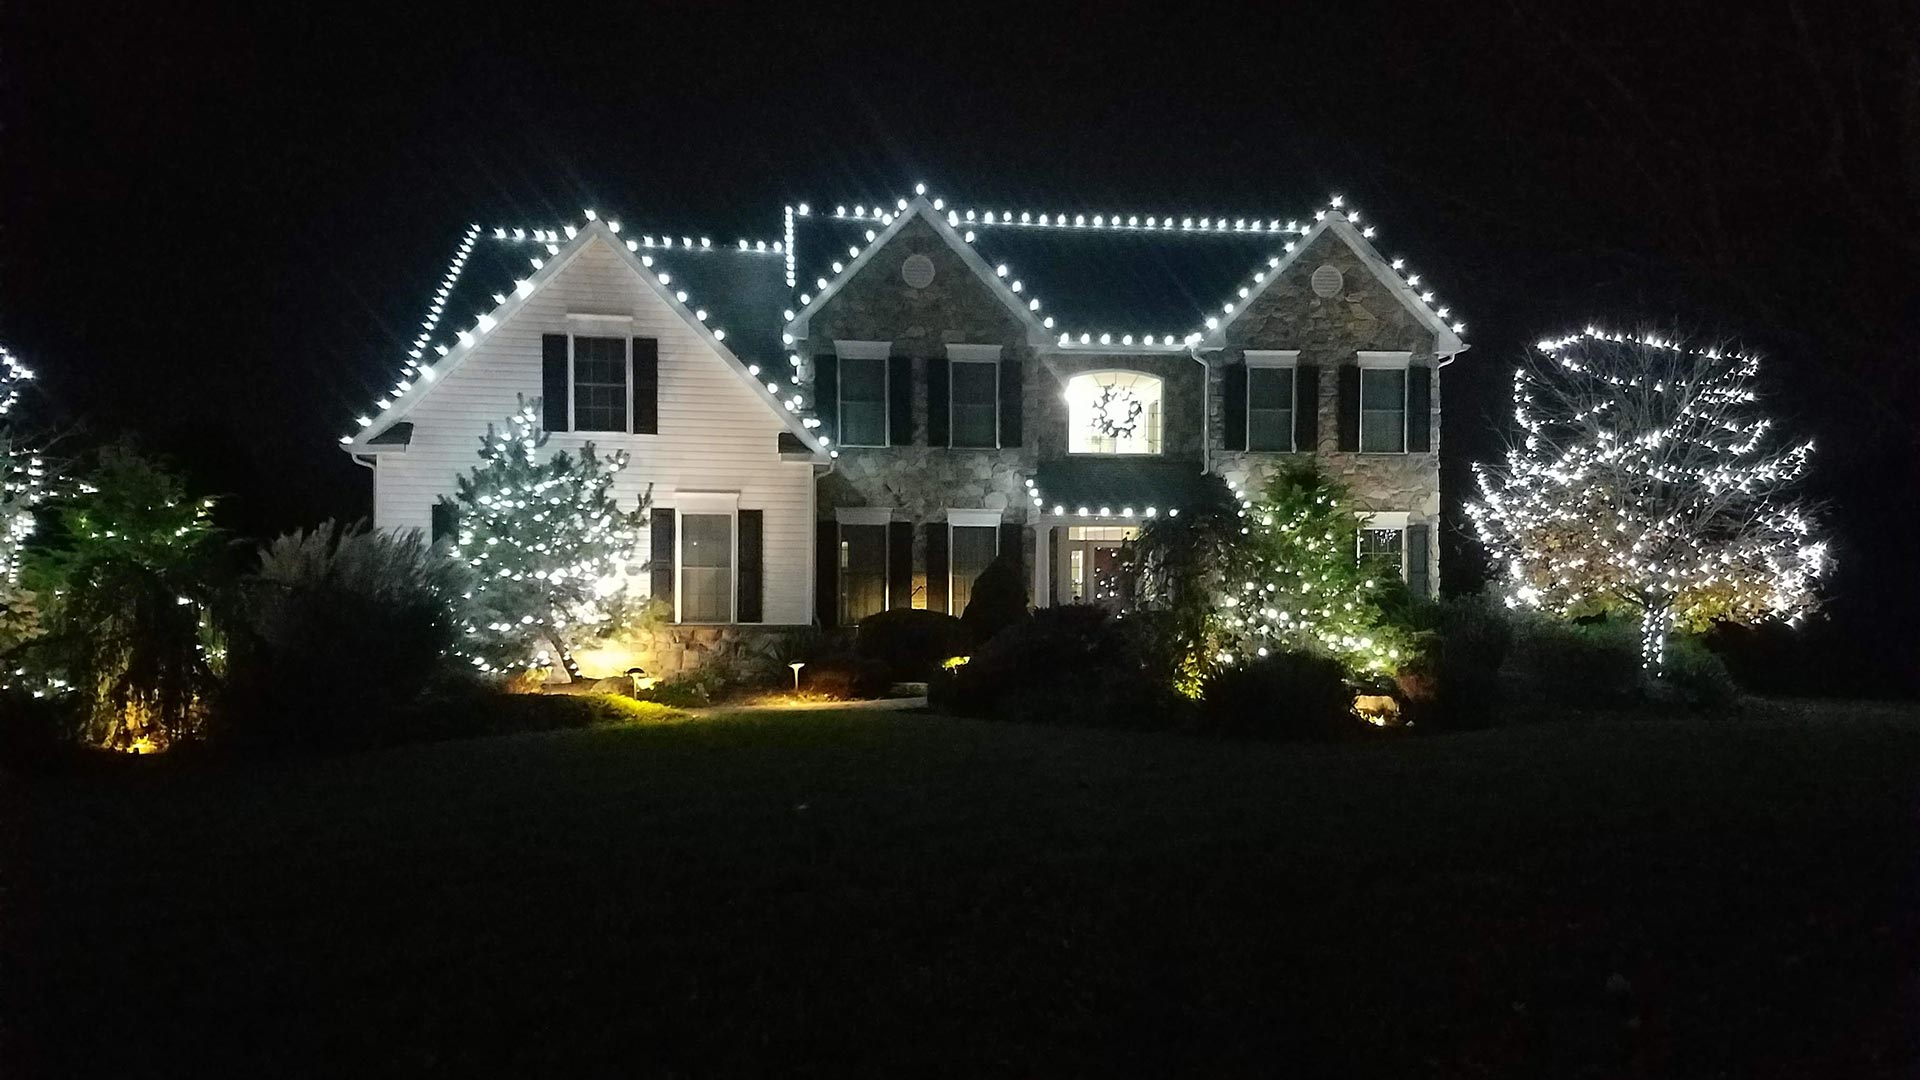 A home with holiday lights near Macungie, PA.